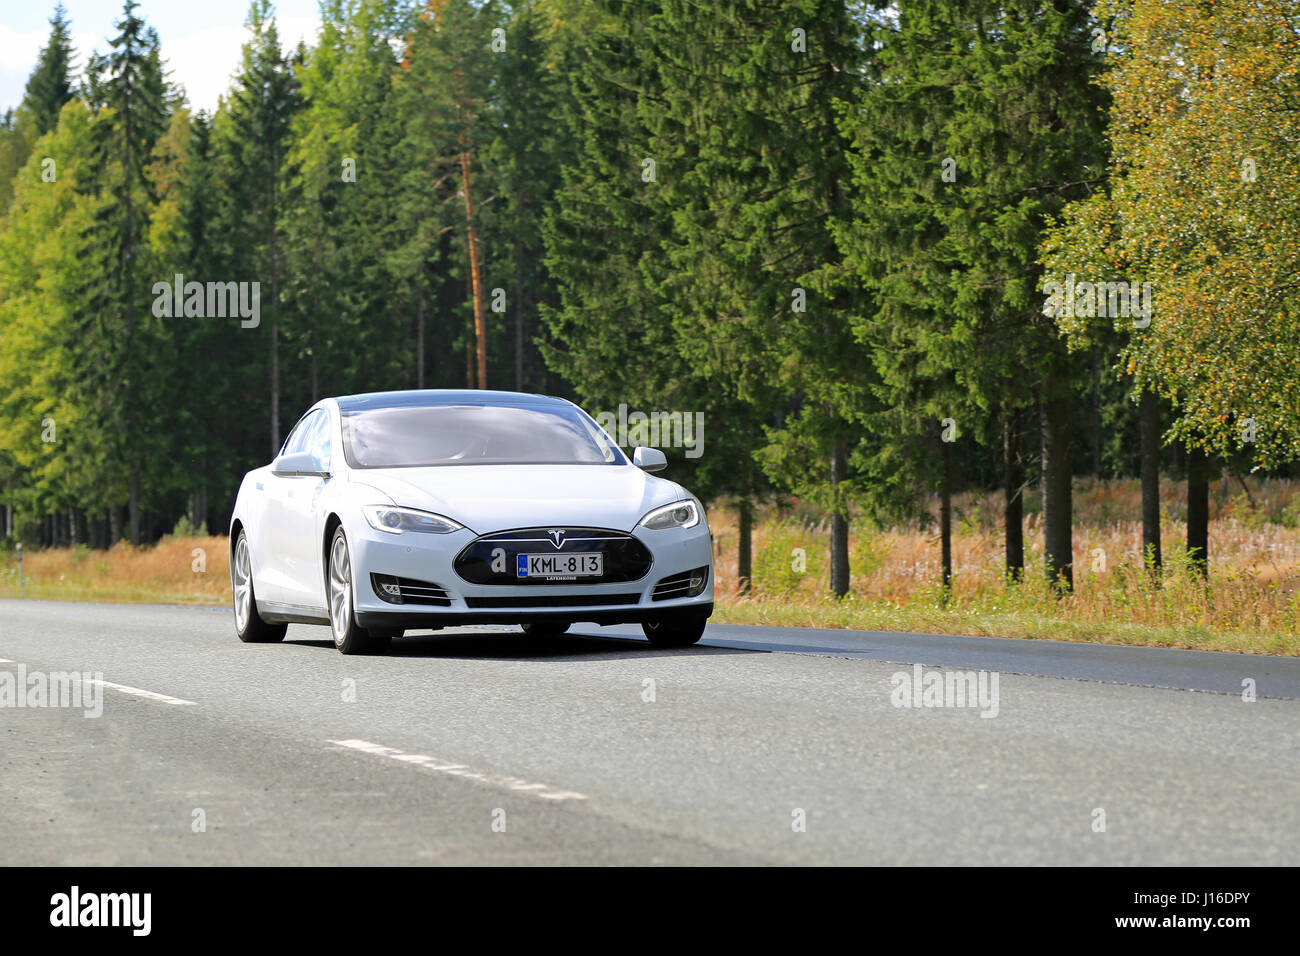 HUMPPILA, FINLAND - SEPTEMBER 12, 2015: Tesla Model S electric car on the road. Tesla’s autopilot technology is close to getting a key update. Stock Photo